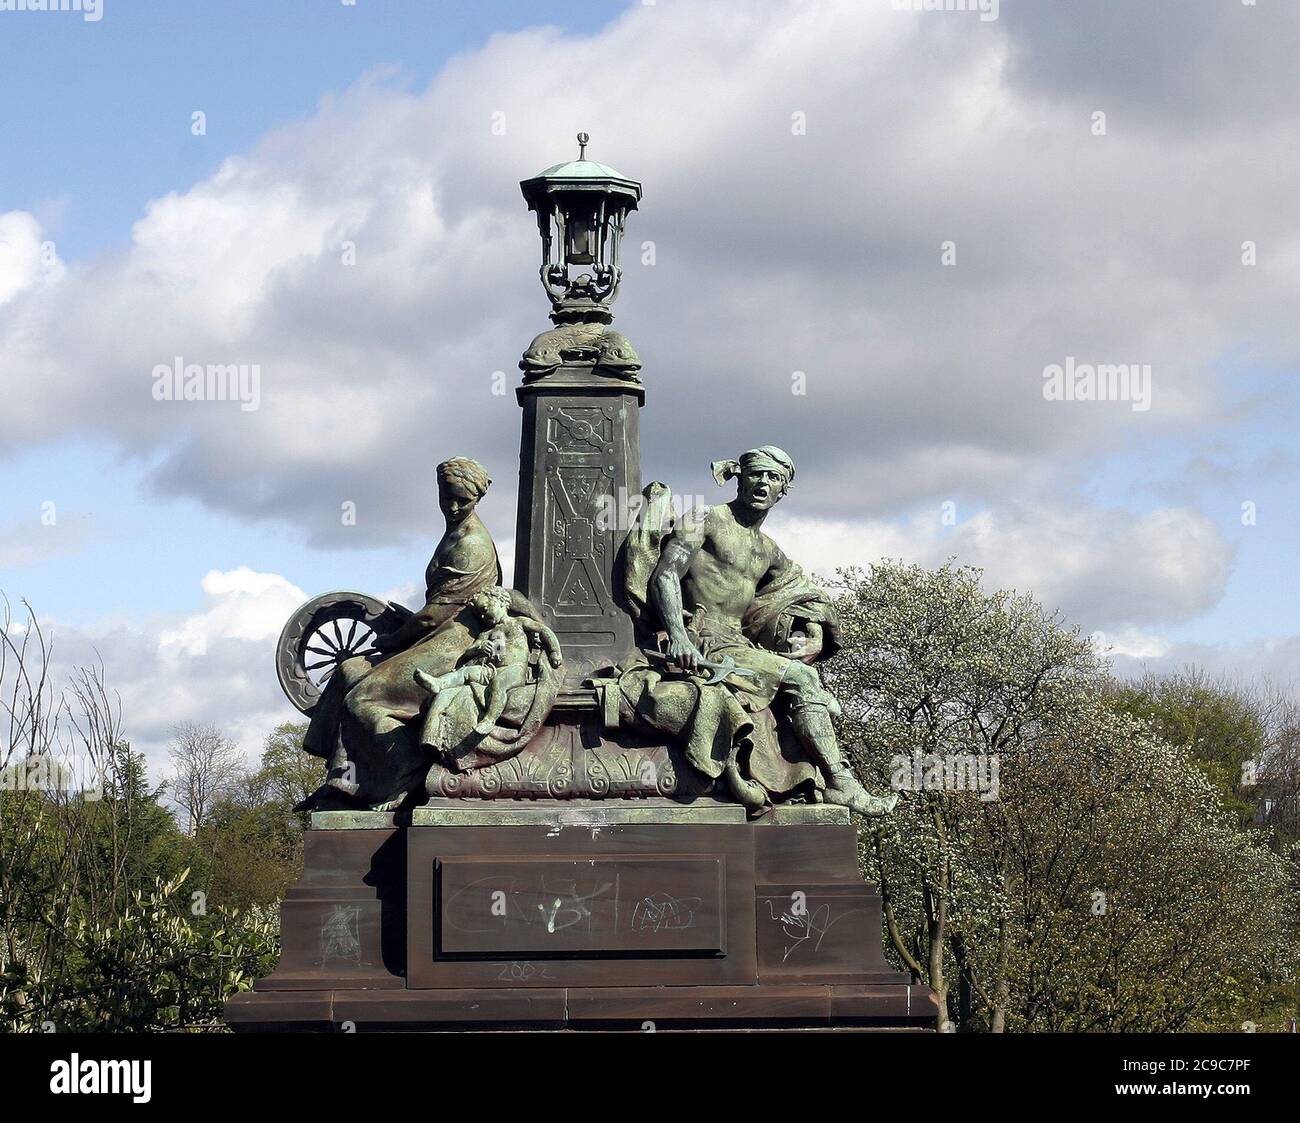 This is one of four remarkable statues that sit on the Kelvin Way bridge in Kelvingrove Park in Glasgow. It was made by Paul Montford and placed onto the bridge in 1920. The name of this statue is: Peace and War. It is a rather unique and intriguing statue. Alan Wylie/ALAMY © Stock Photo